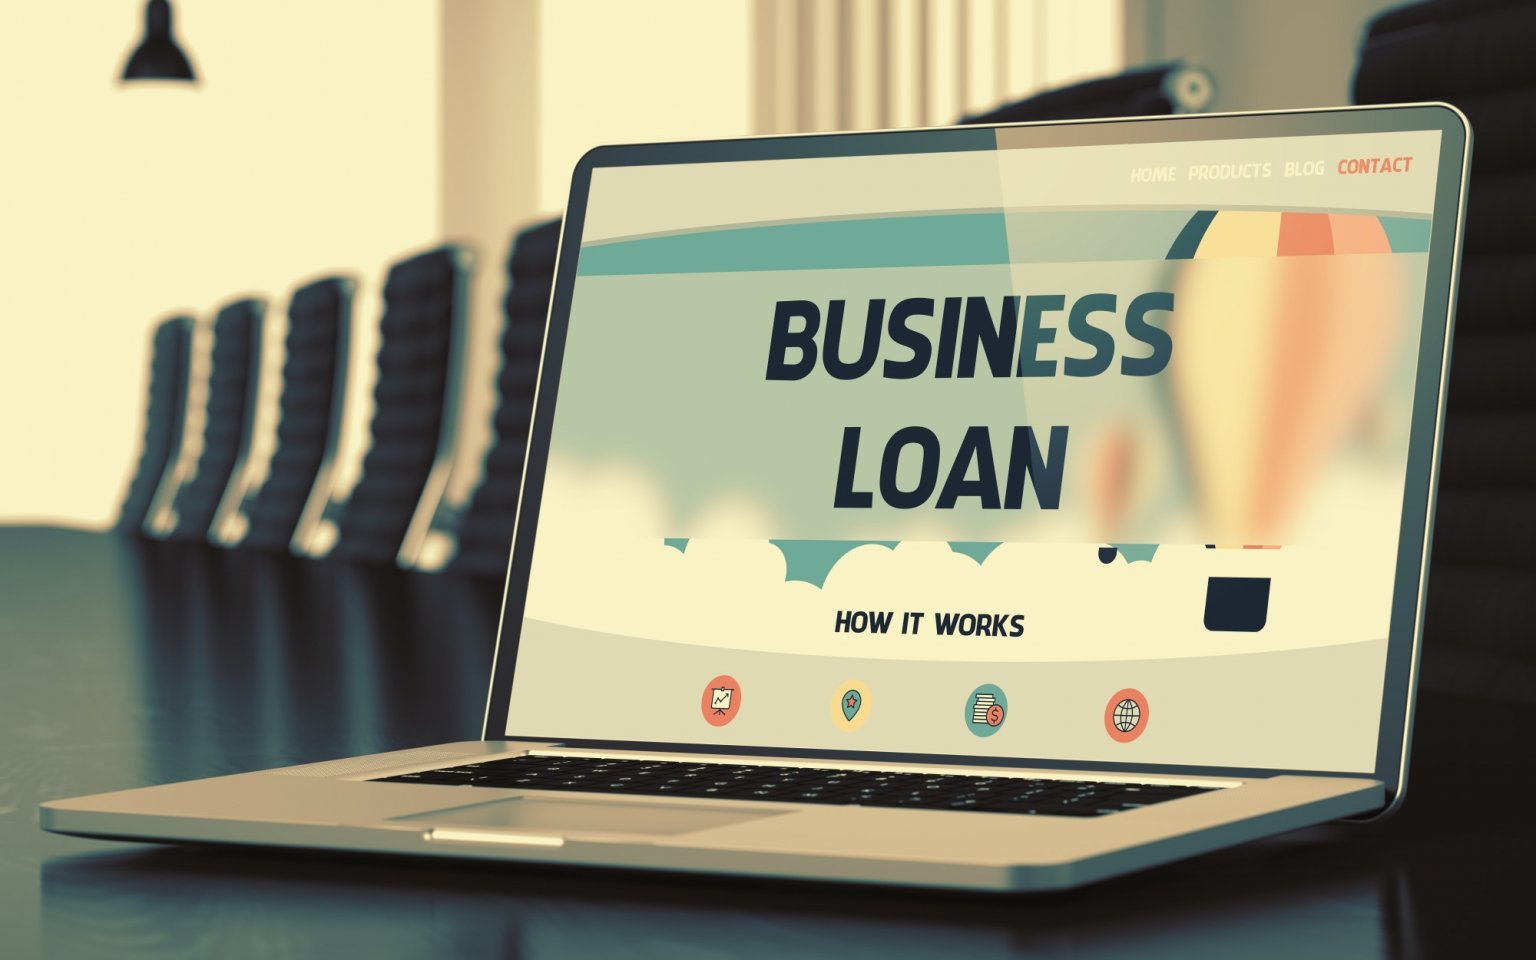 Is Taking out a Business Loan a Good Idea When You Start?